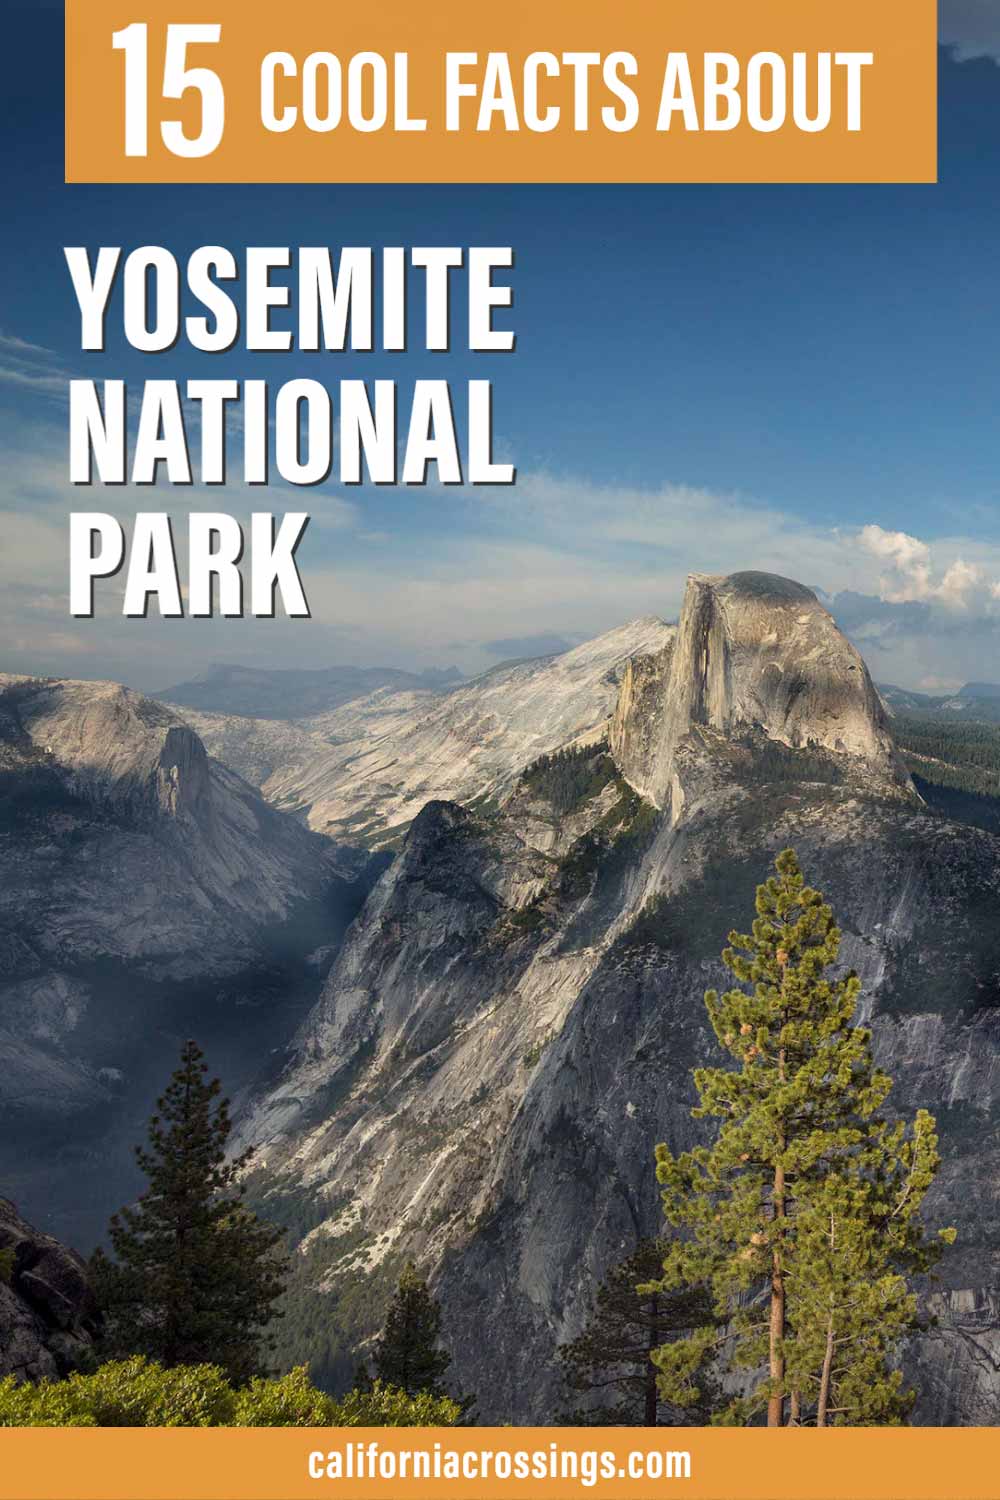 15 Cool facts about Yosemite National Park